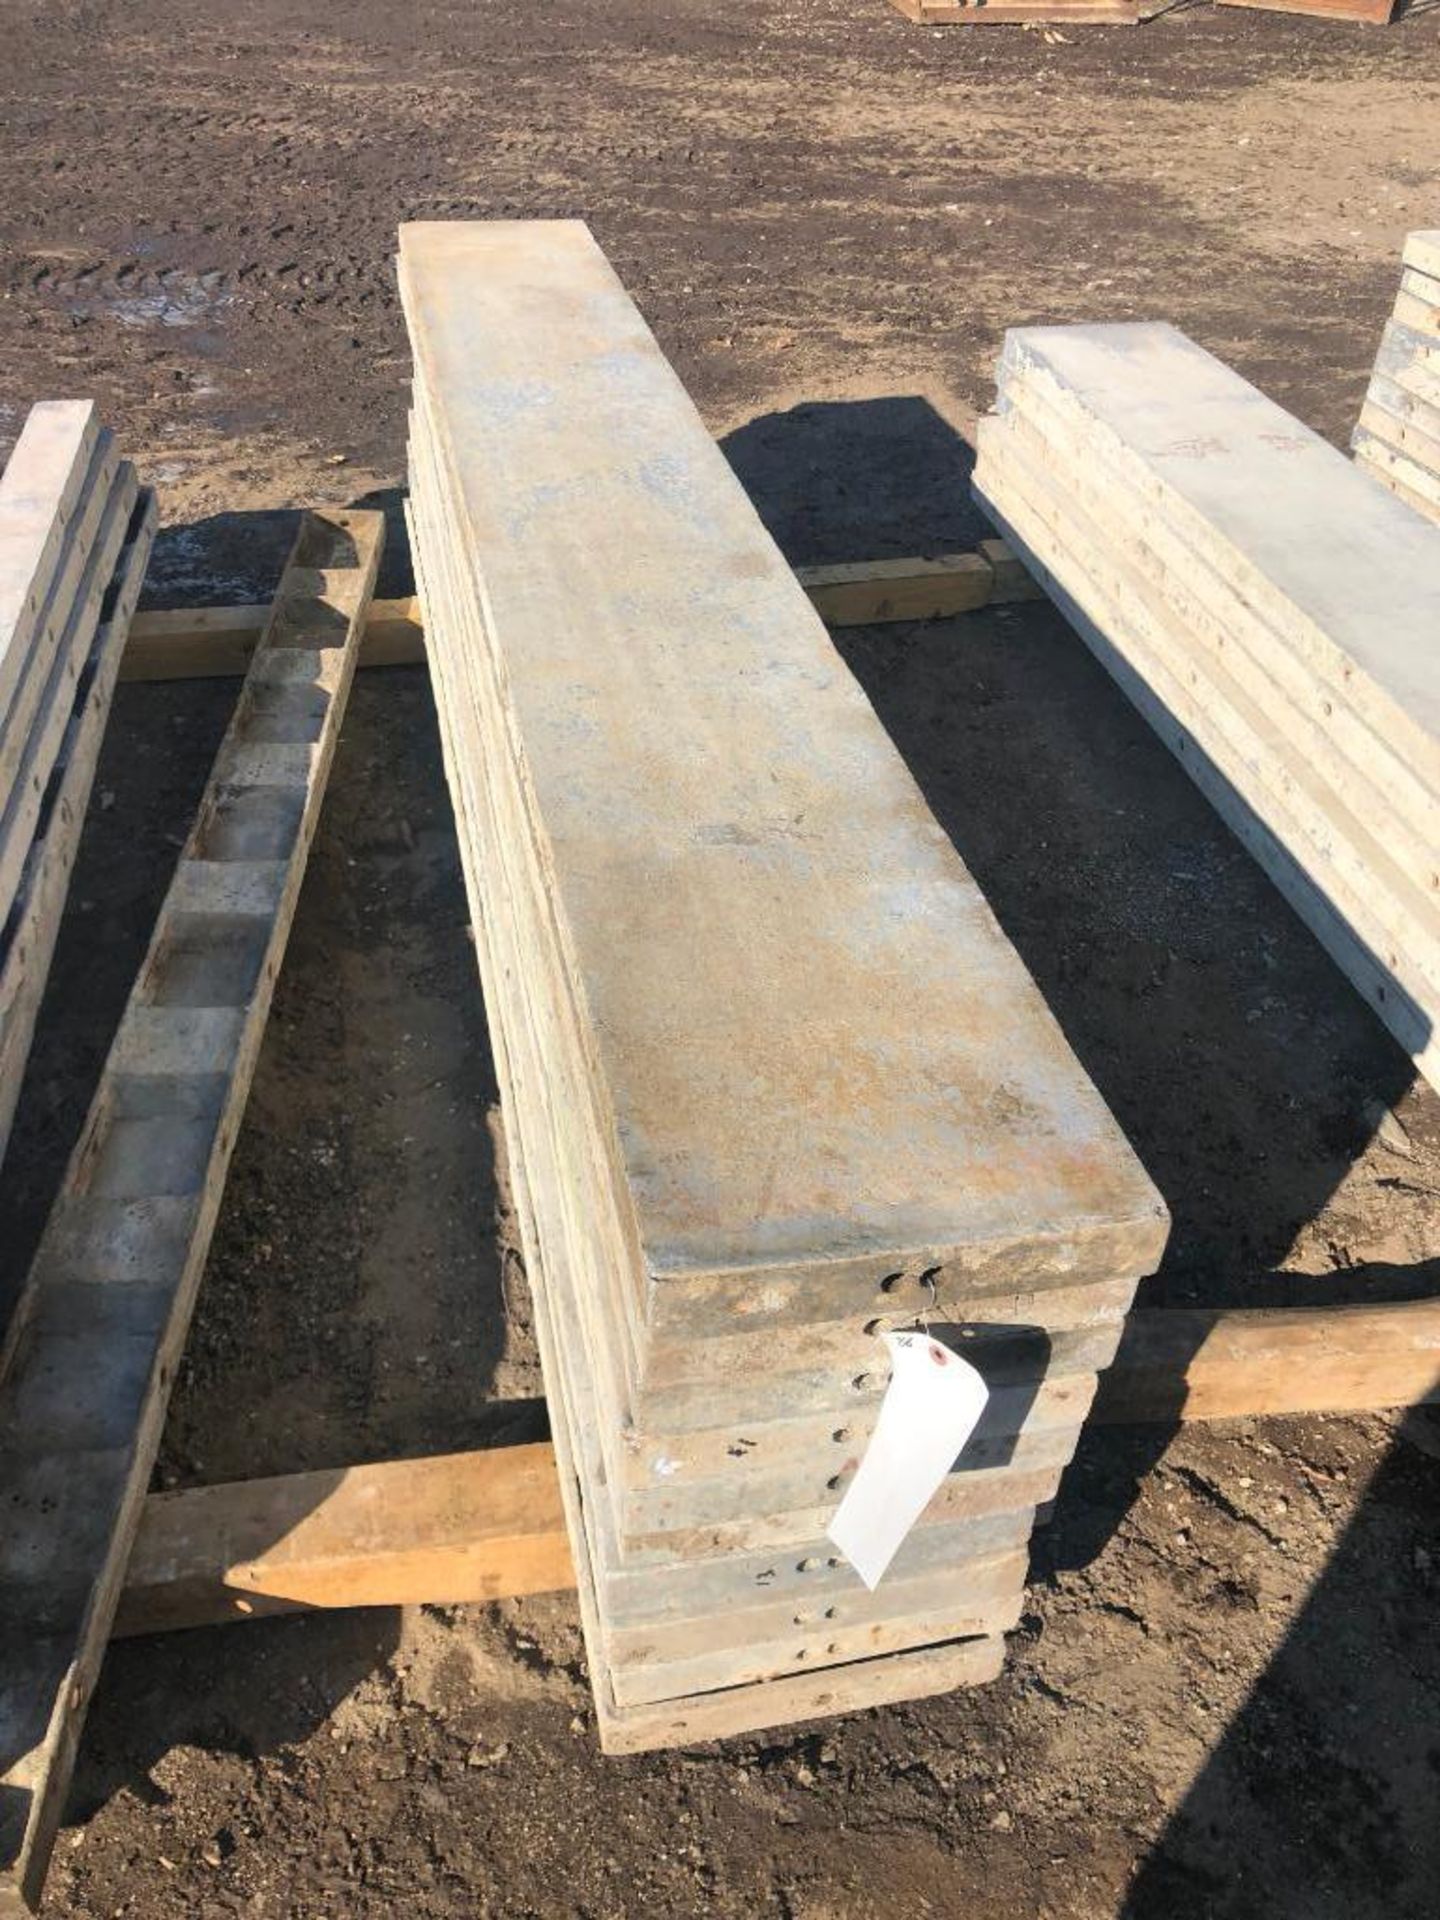 (10) 13" x 8' Western Aluminum Concrete Forms, Smooth 6-12 Hole Pattern, Located in Naperville,